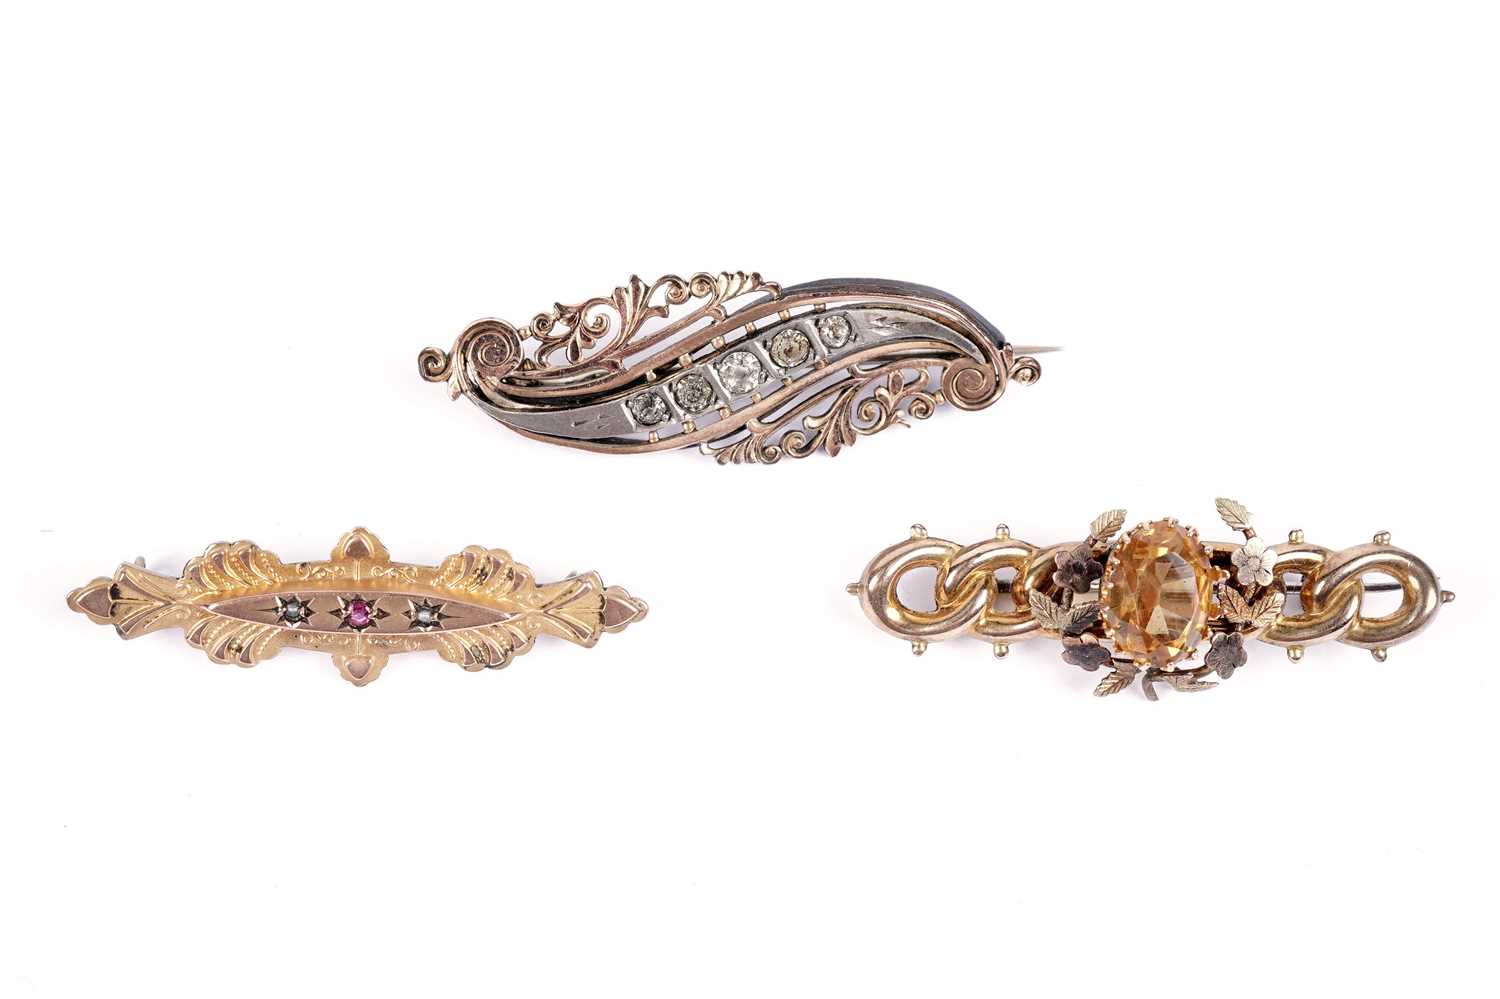 Victorian and Edwardian bar brooches